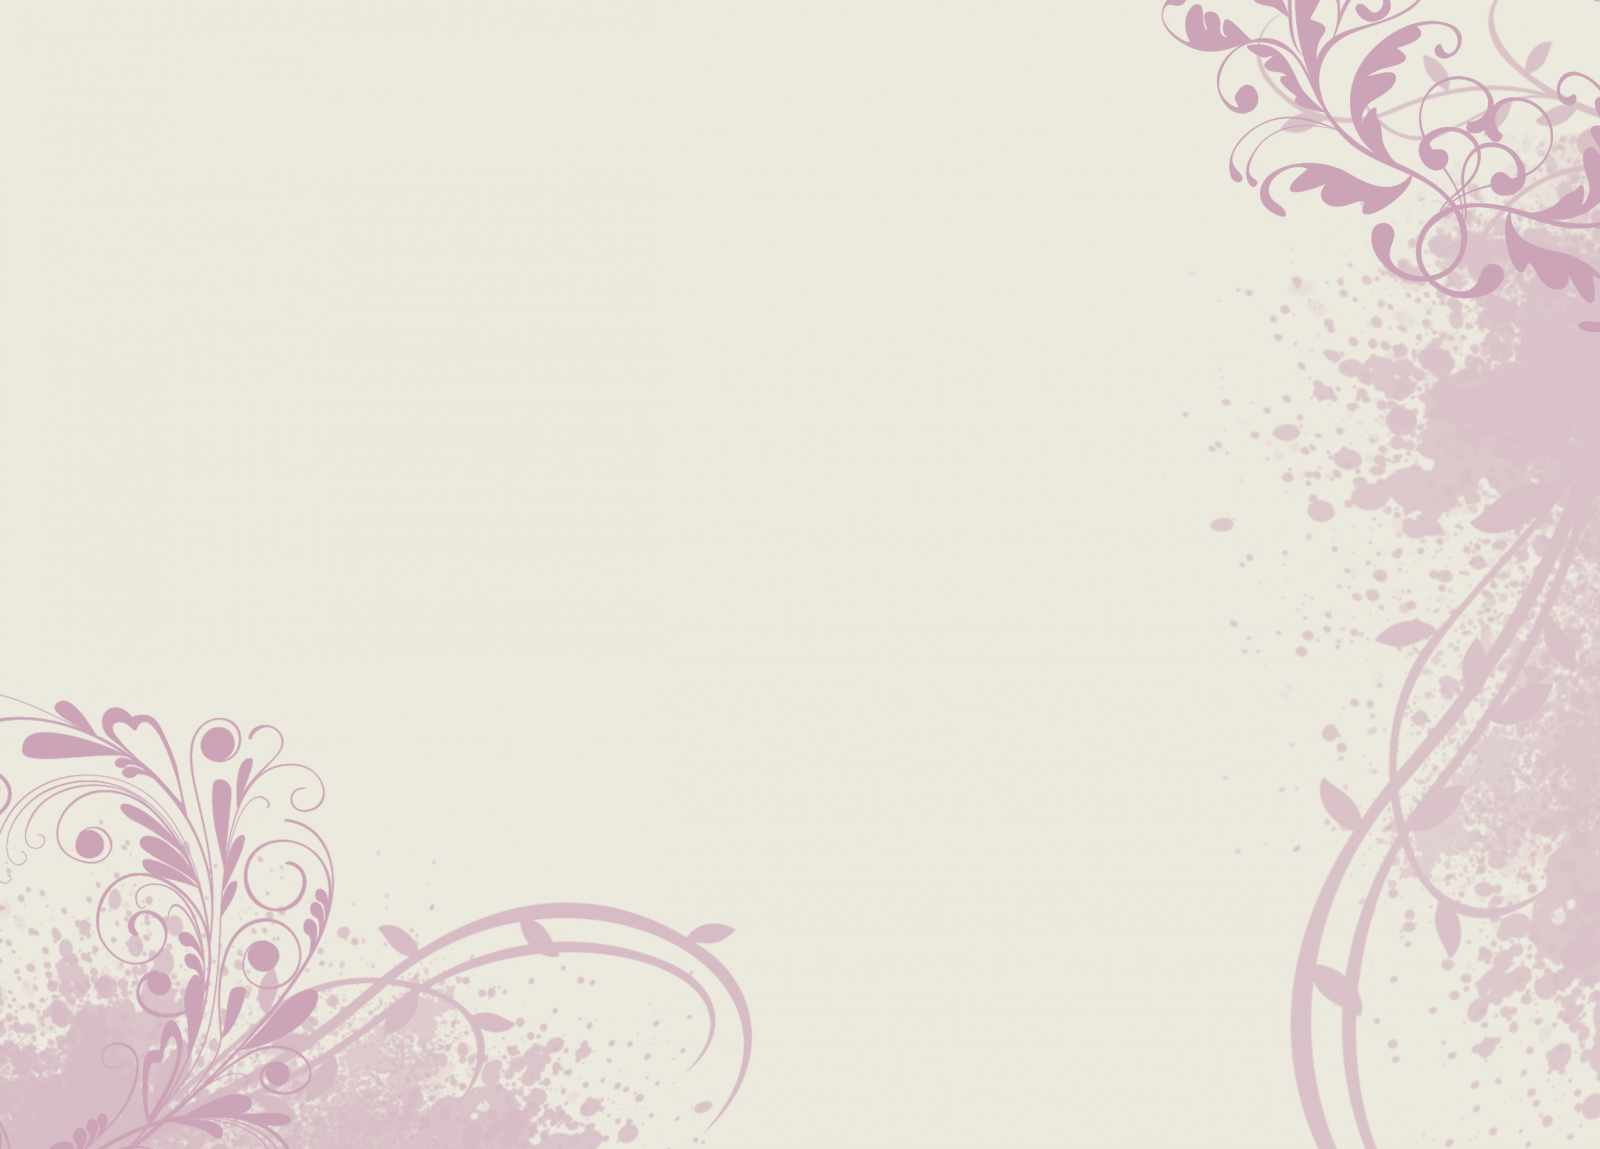 Free Background Image for Invitations Beautiful